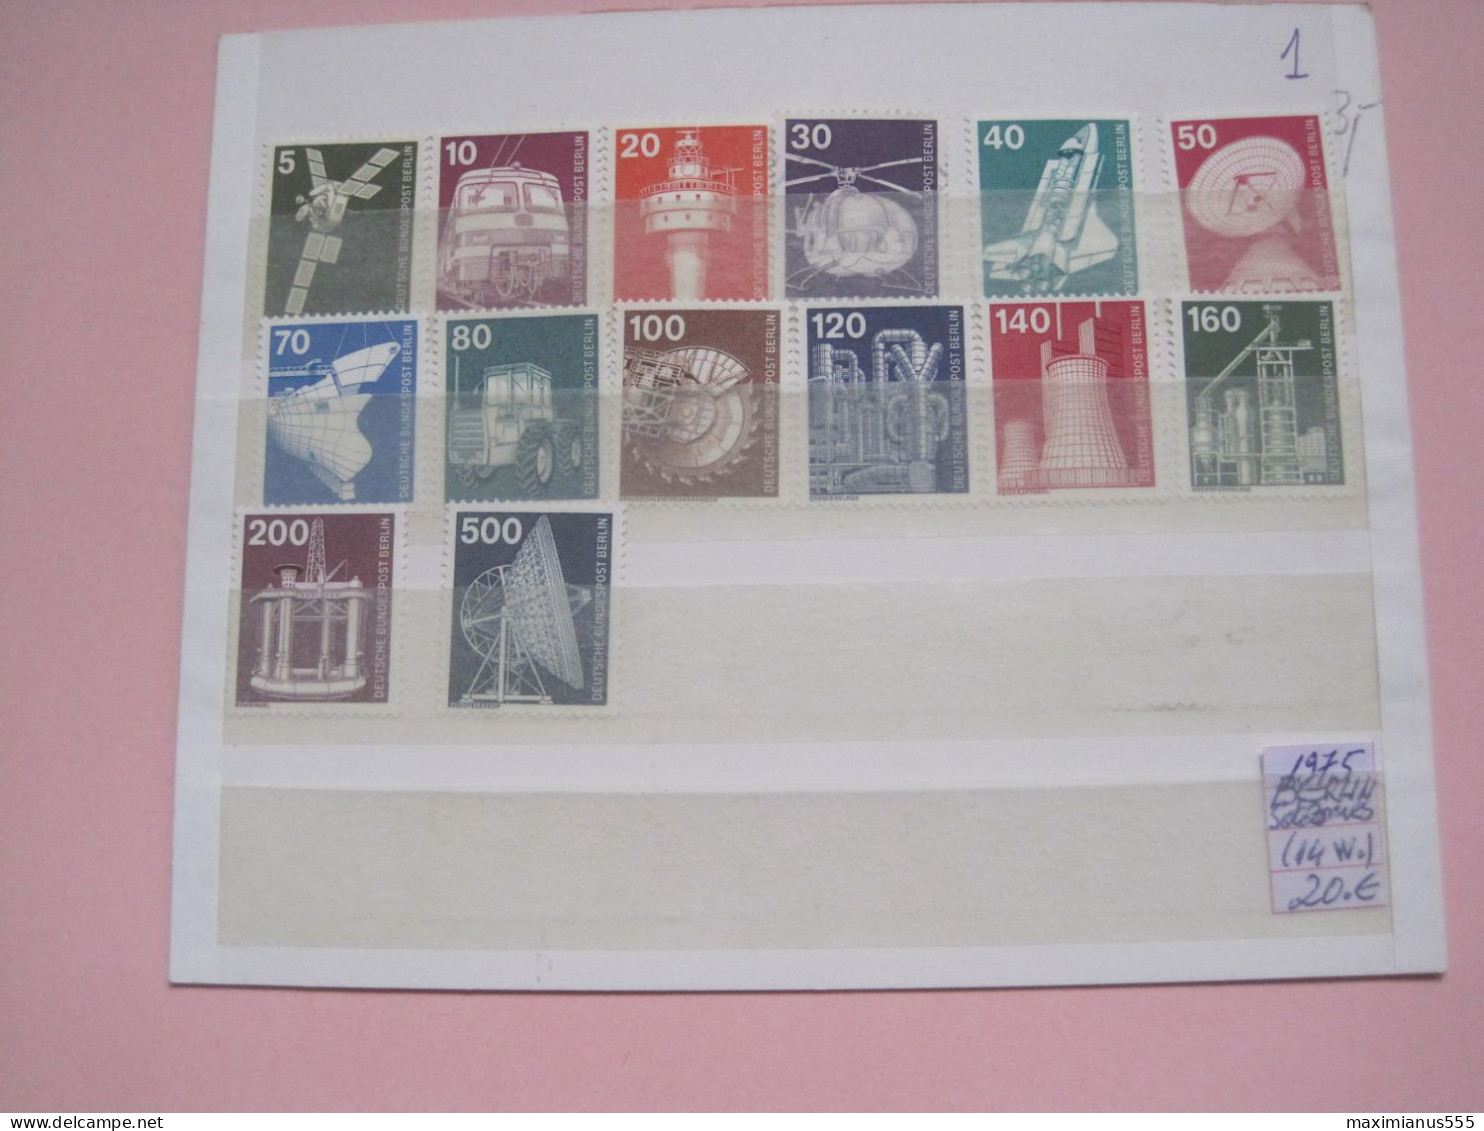 Germany Berlin Satz. (14W.) 1975, Michel 2022, 50% Off Price (1) - Used Stamps